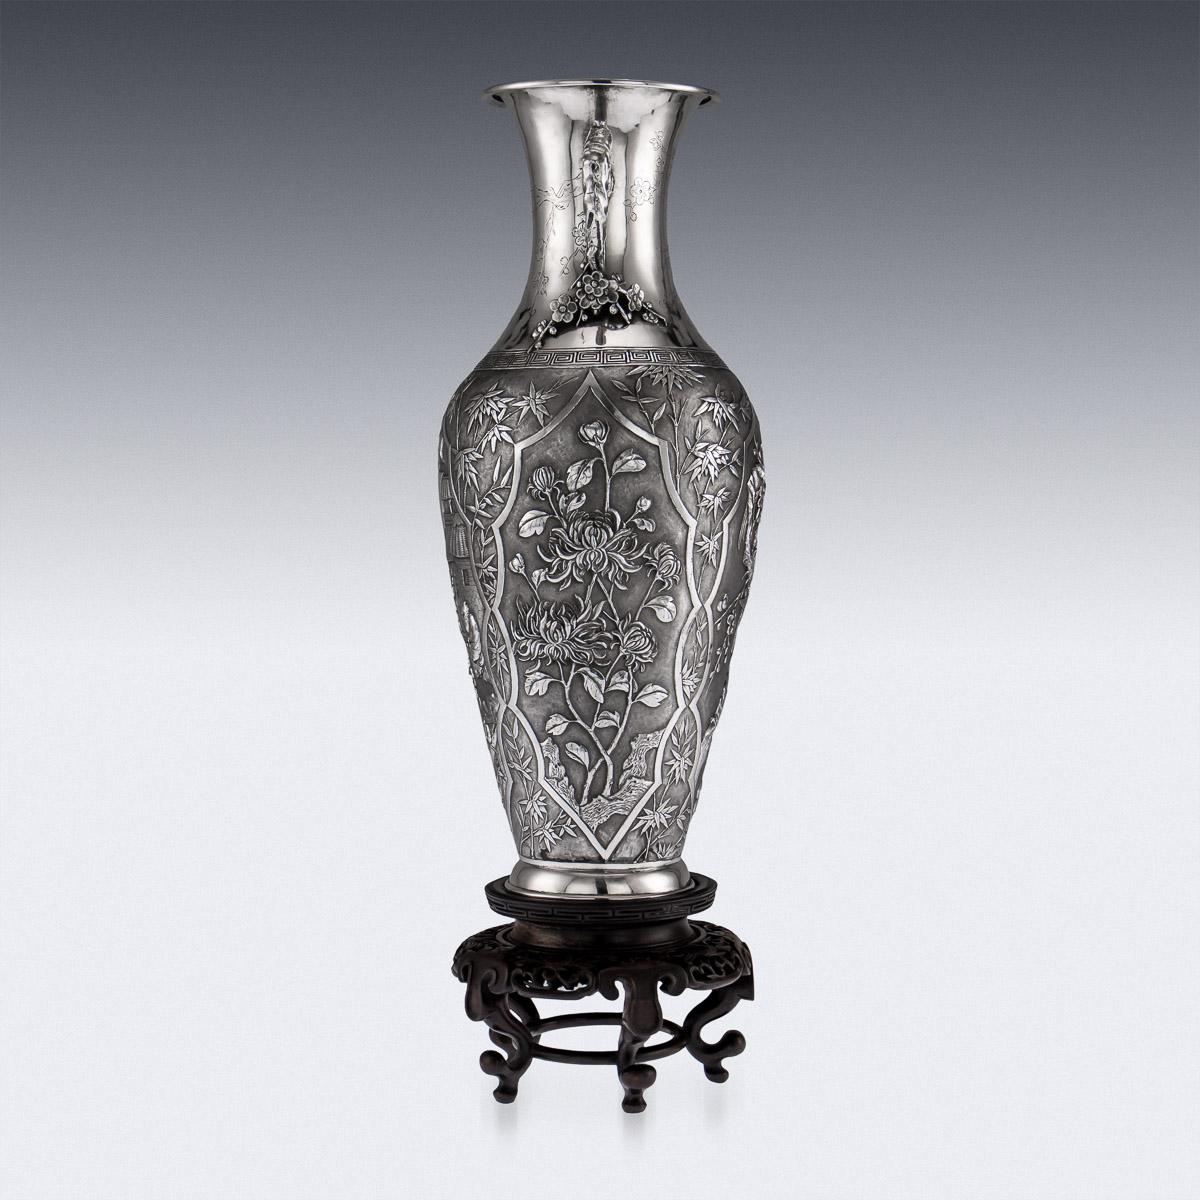 Antique 19th century Chinese Export solid silver vase on Stand, impressive and exceptionally Fine, of baluster form, the body showing a compendium of the finest techniques and styles used in Chinese Export Silver; the body decorated with four sharp